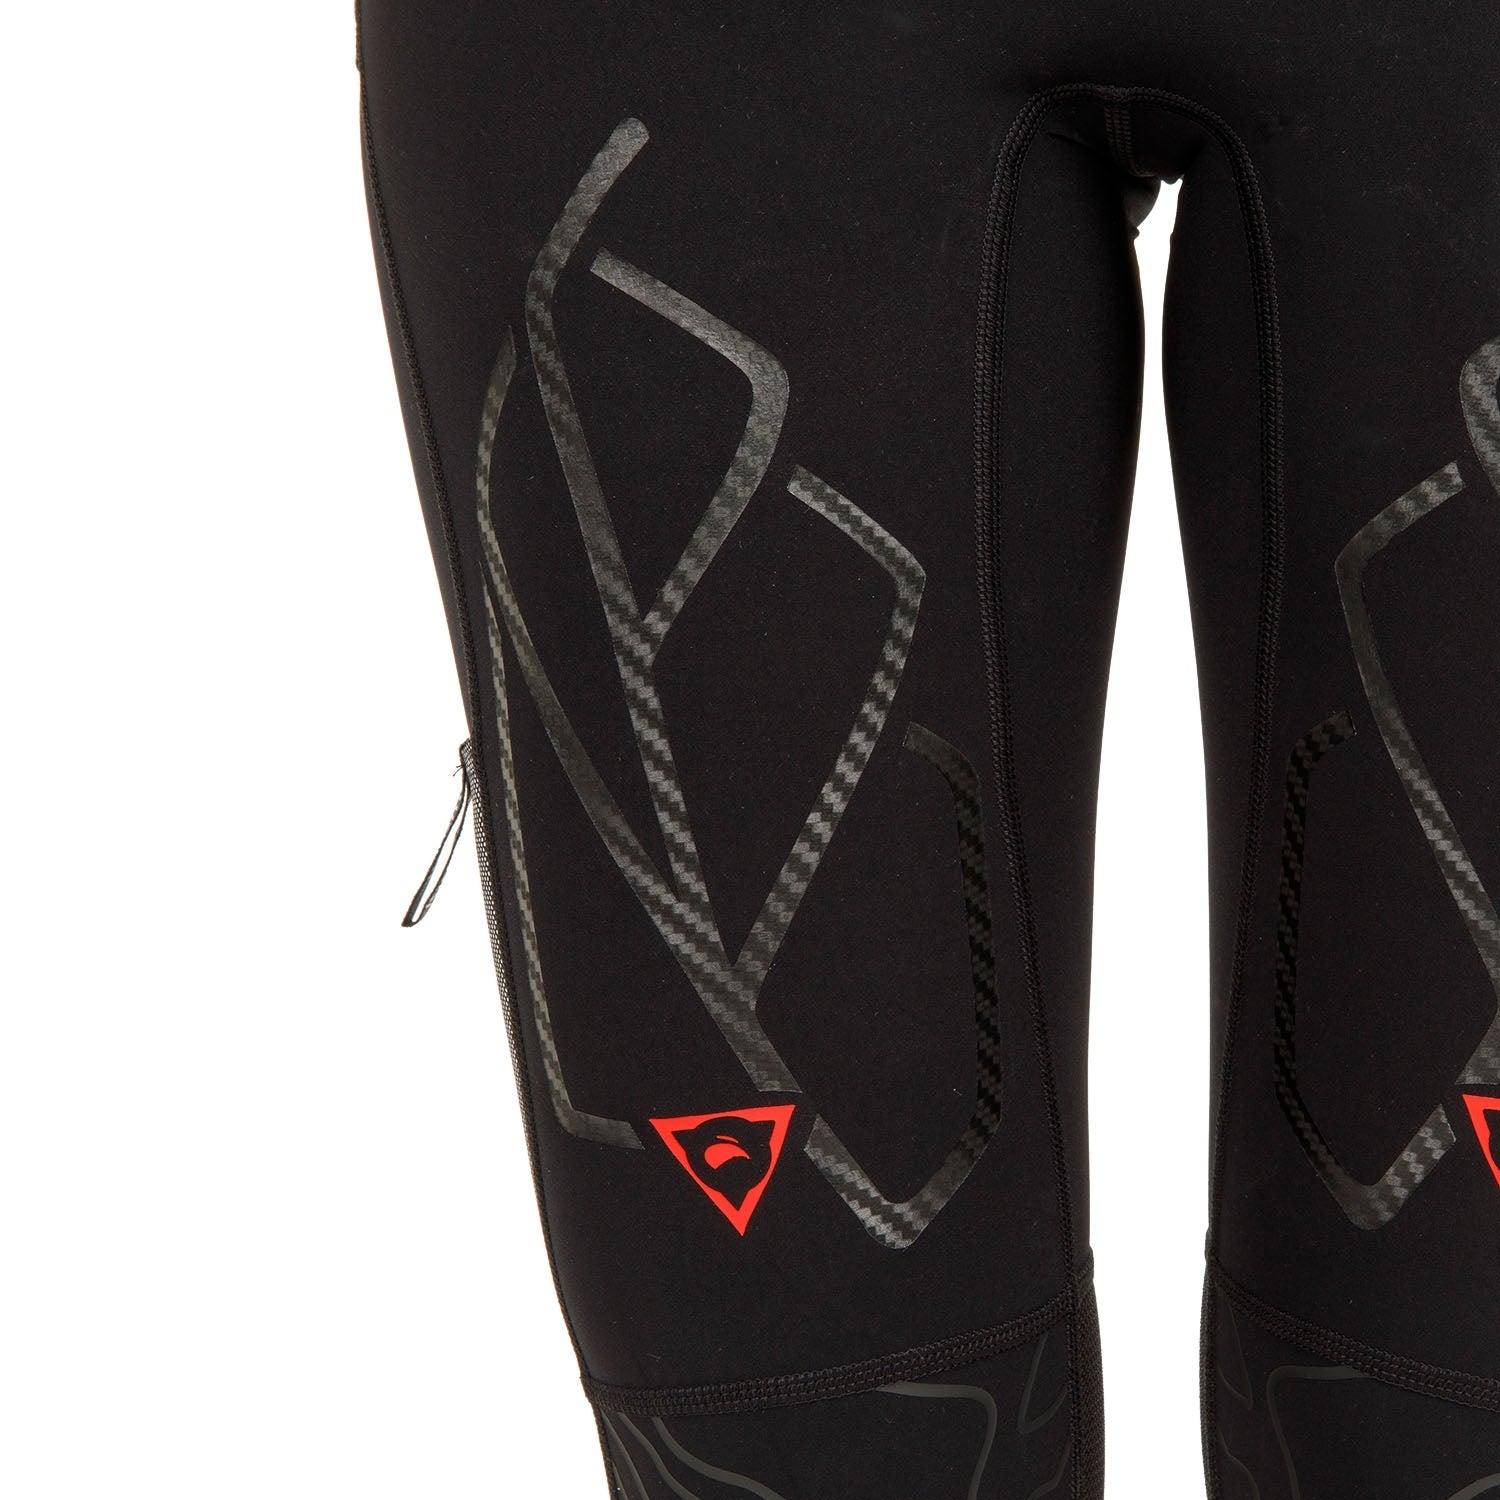 technical_racing_tights_fabricated_in_france_kiwami_sports